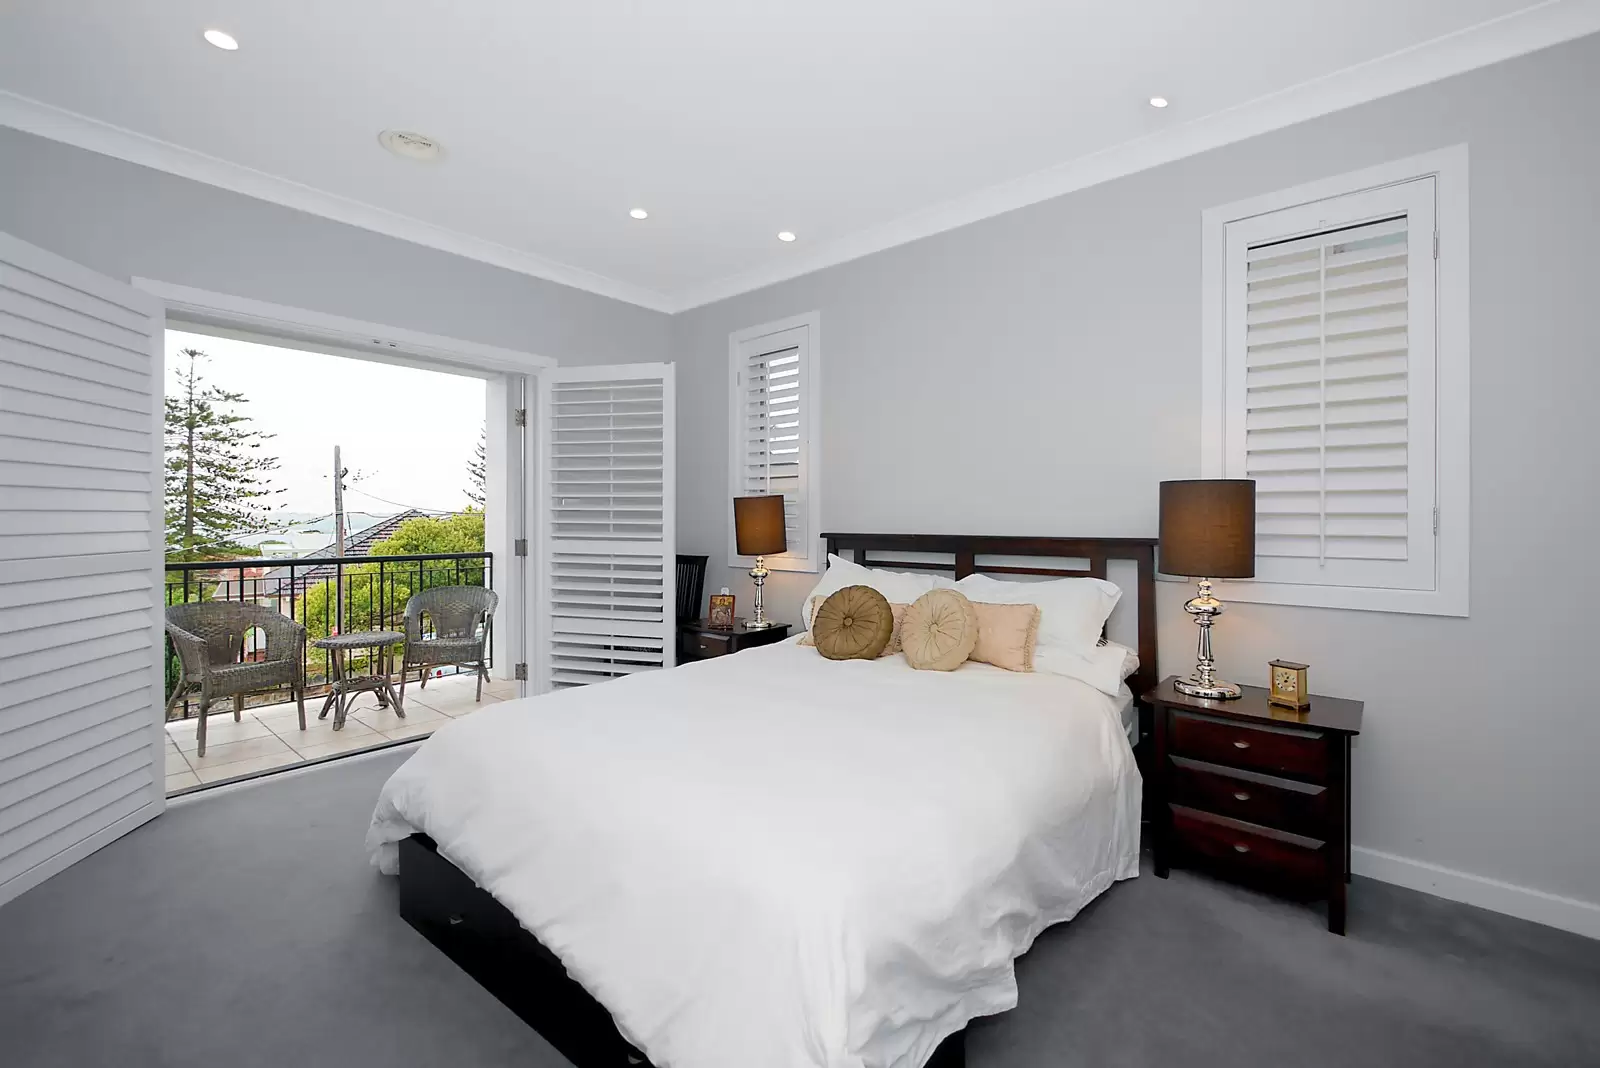 Photo #9: 18 Bangalla Road, Rose Bay - Sold by Sydney Sotheby's International Realty